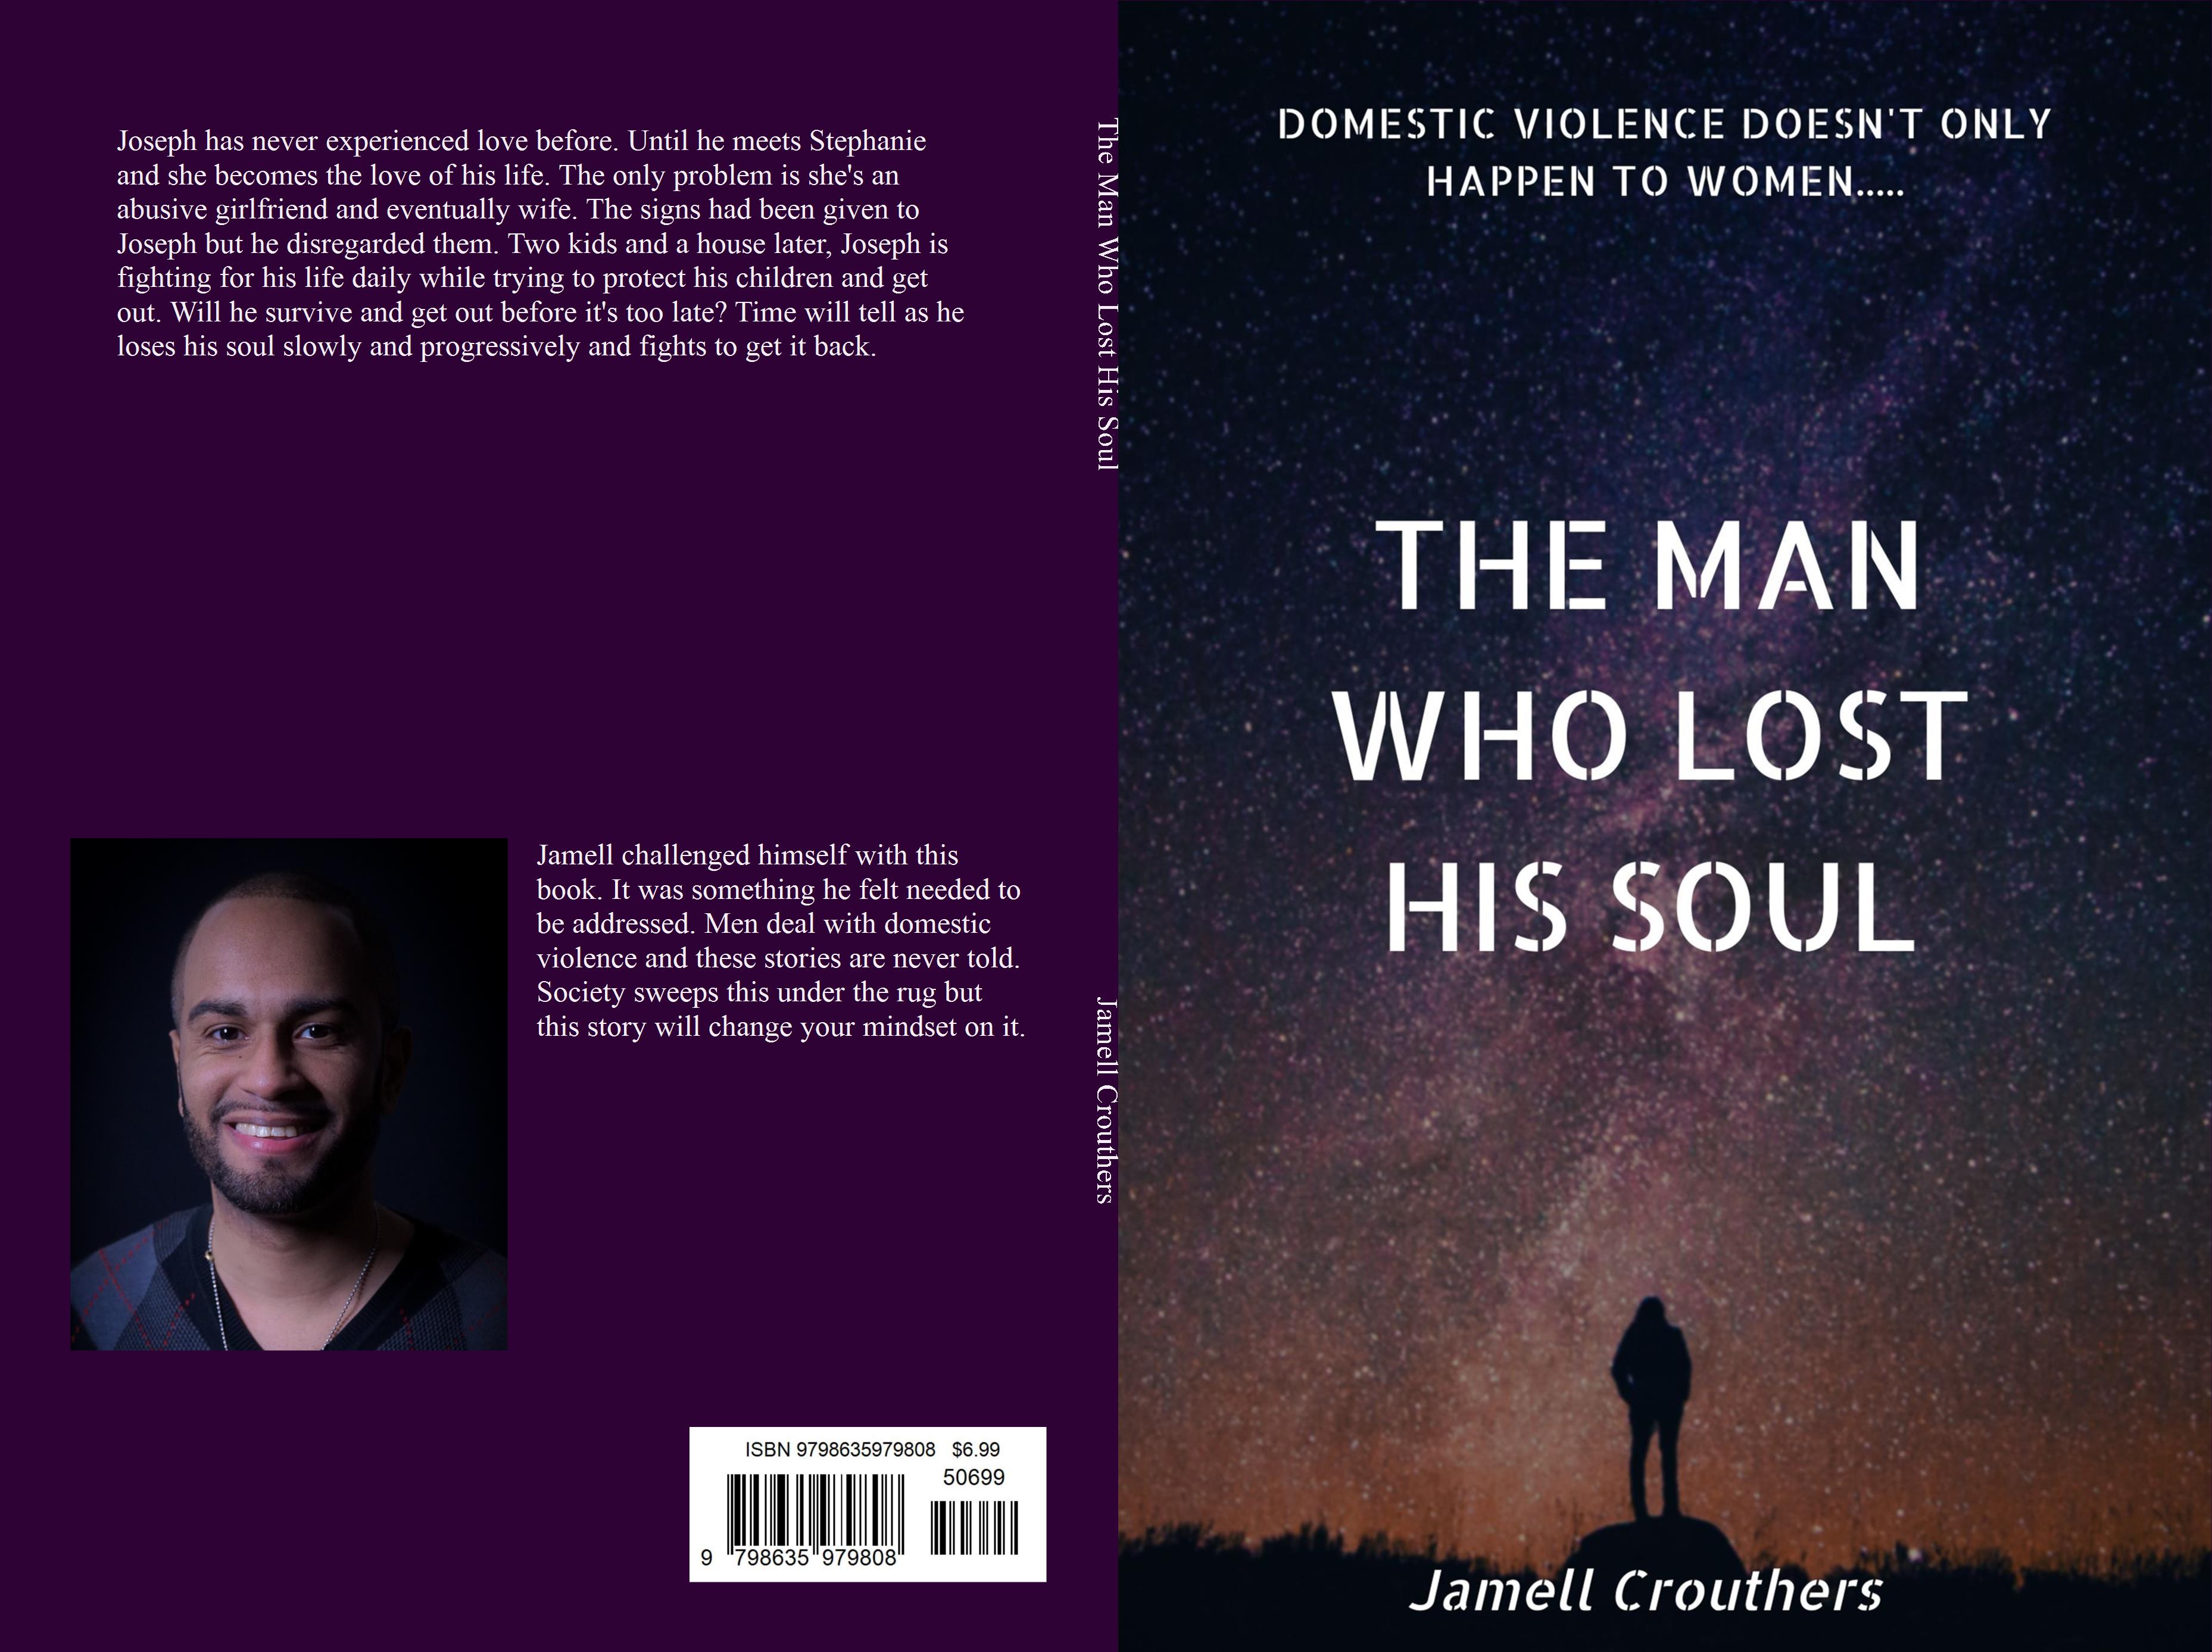 The Man Who Lost His Soul cover image